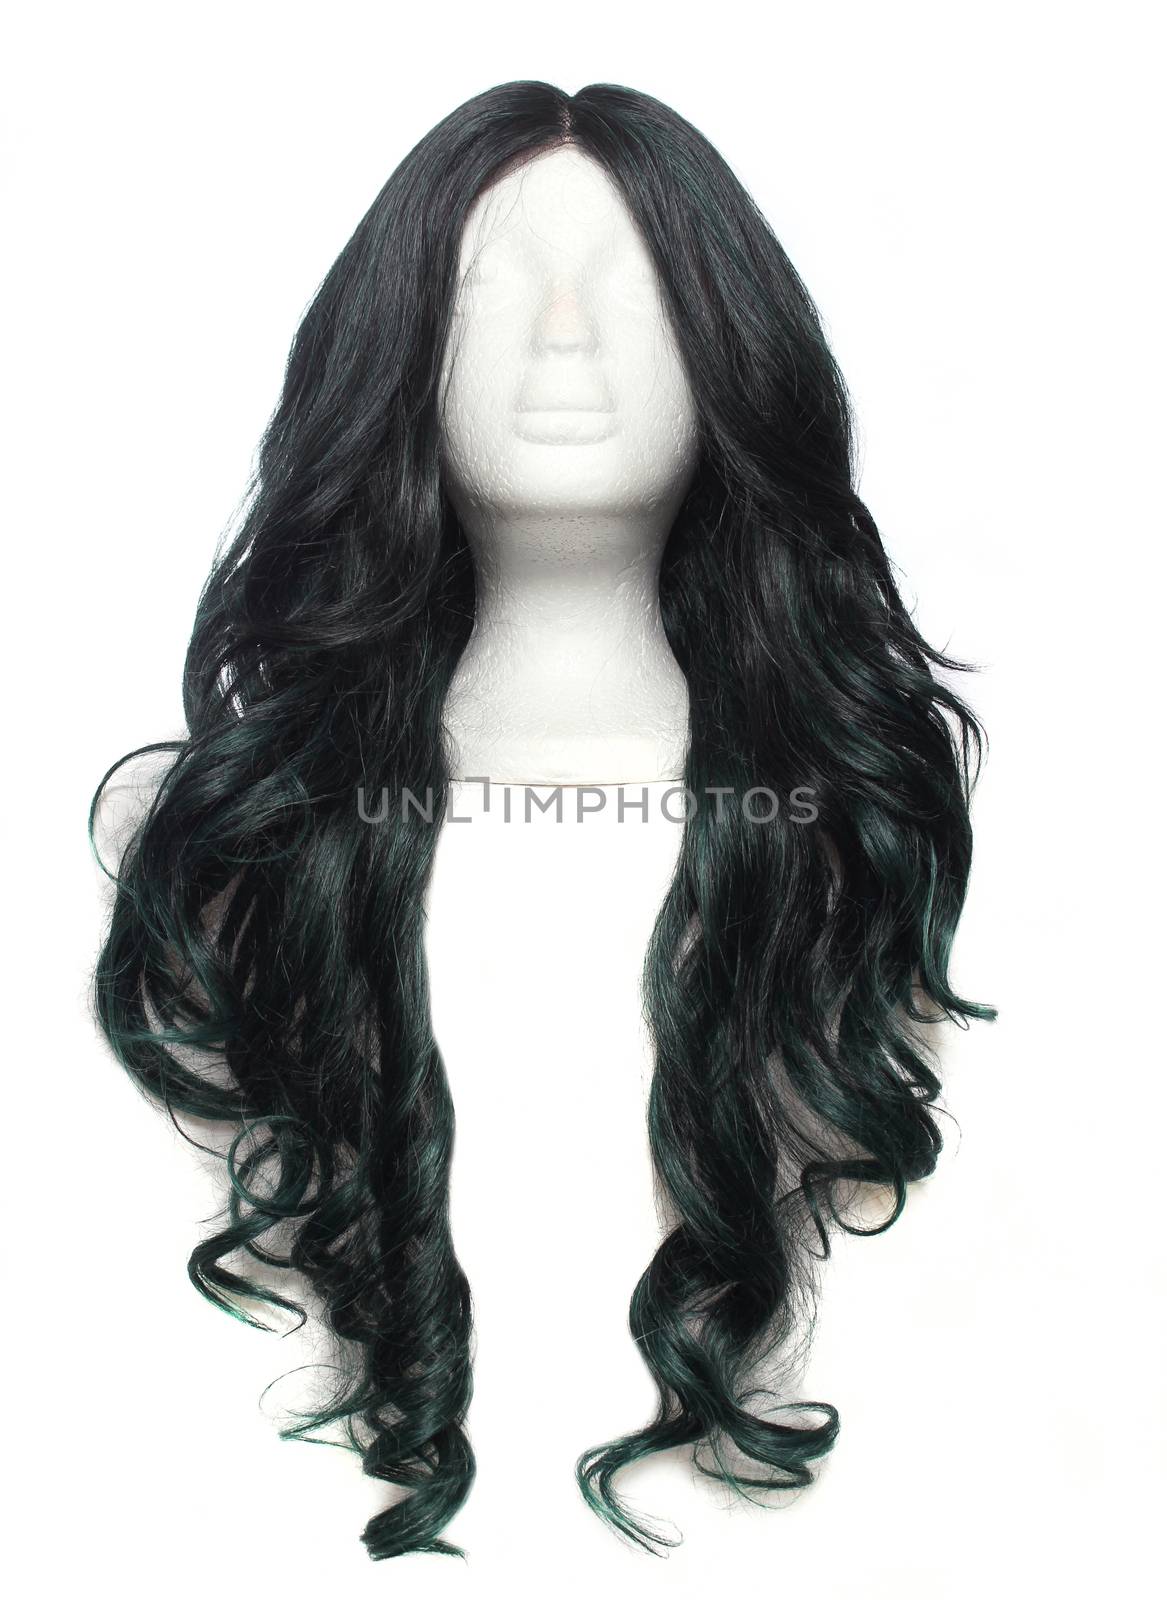 Black With Green Wig on Mannequin head with white background